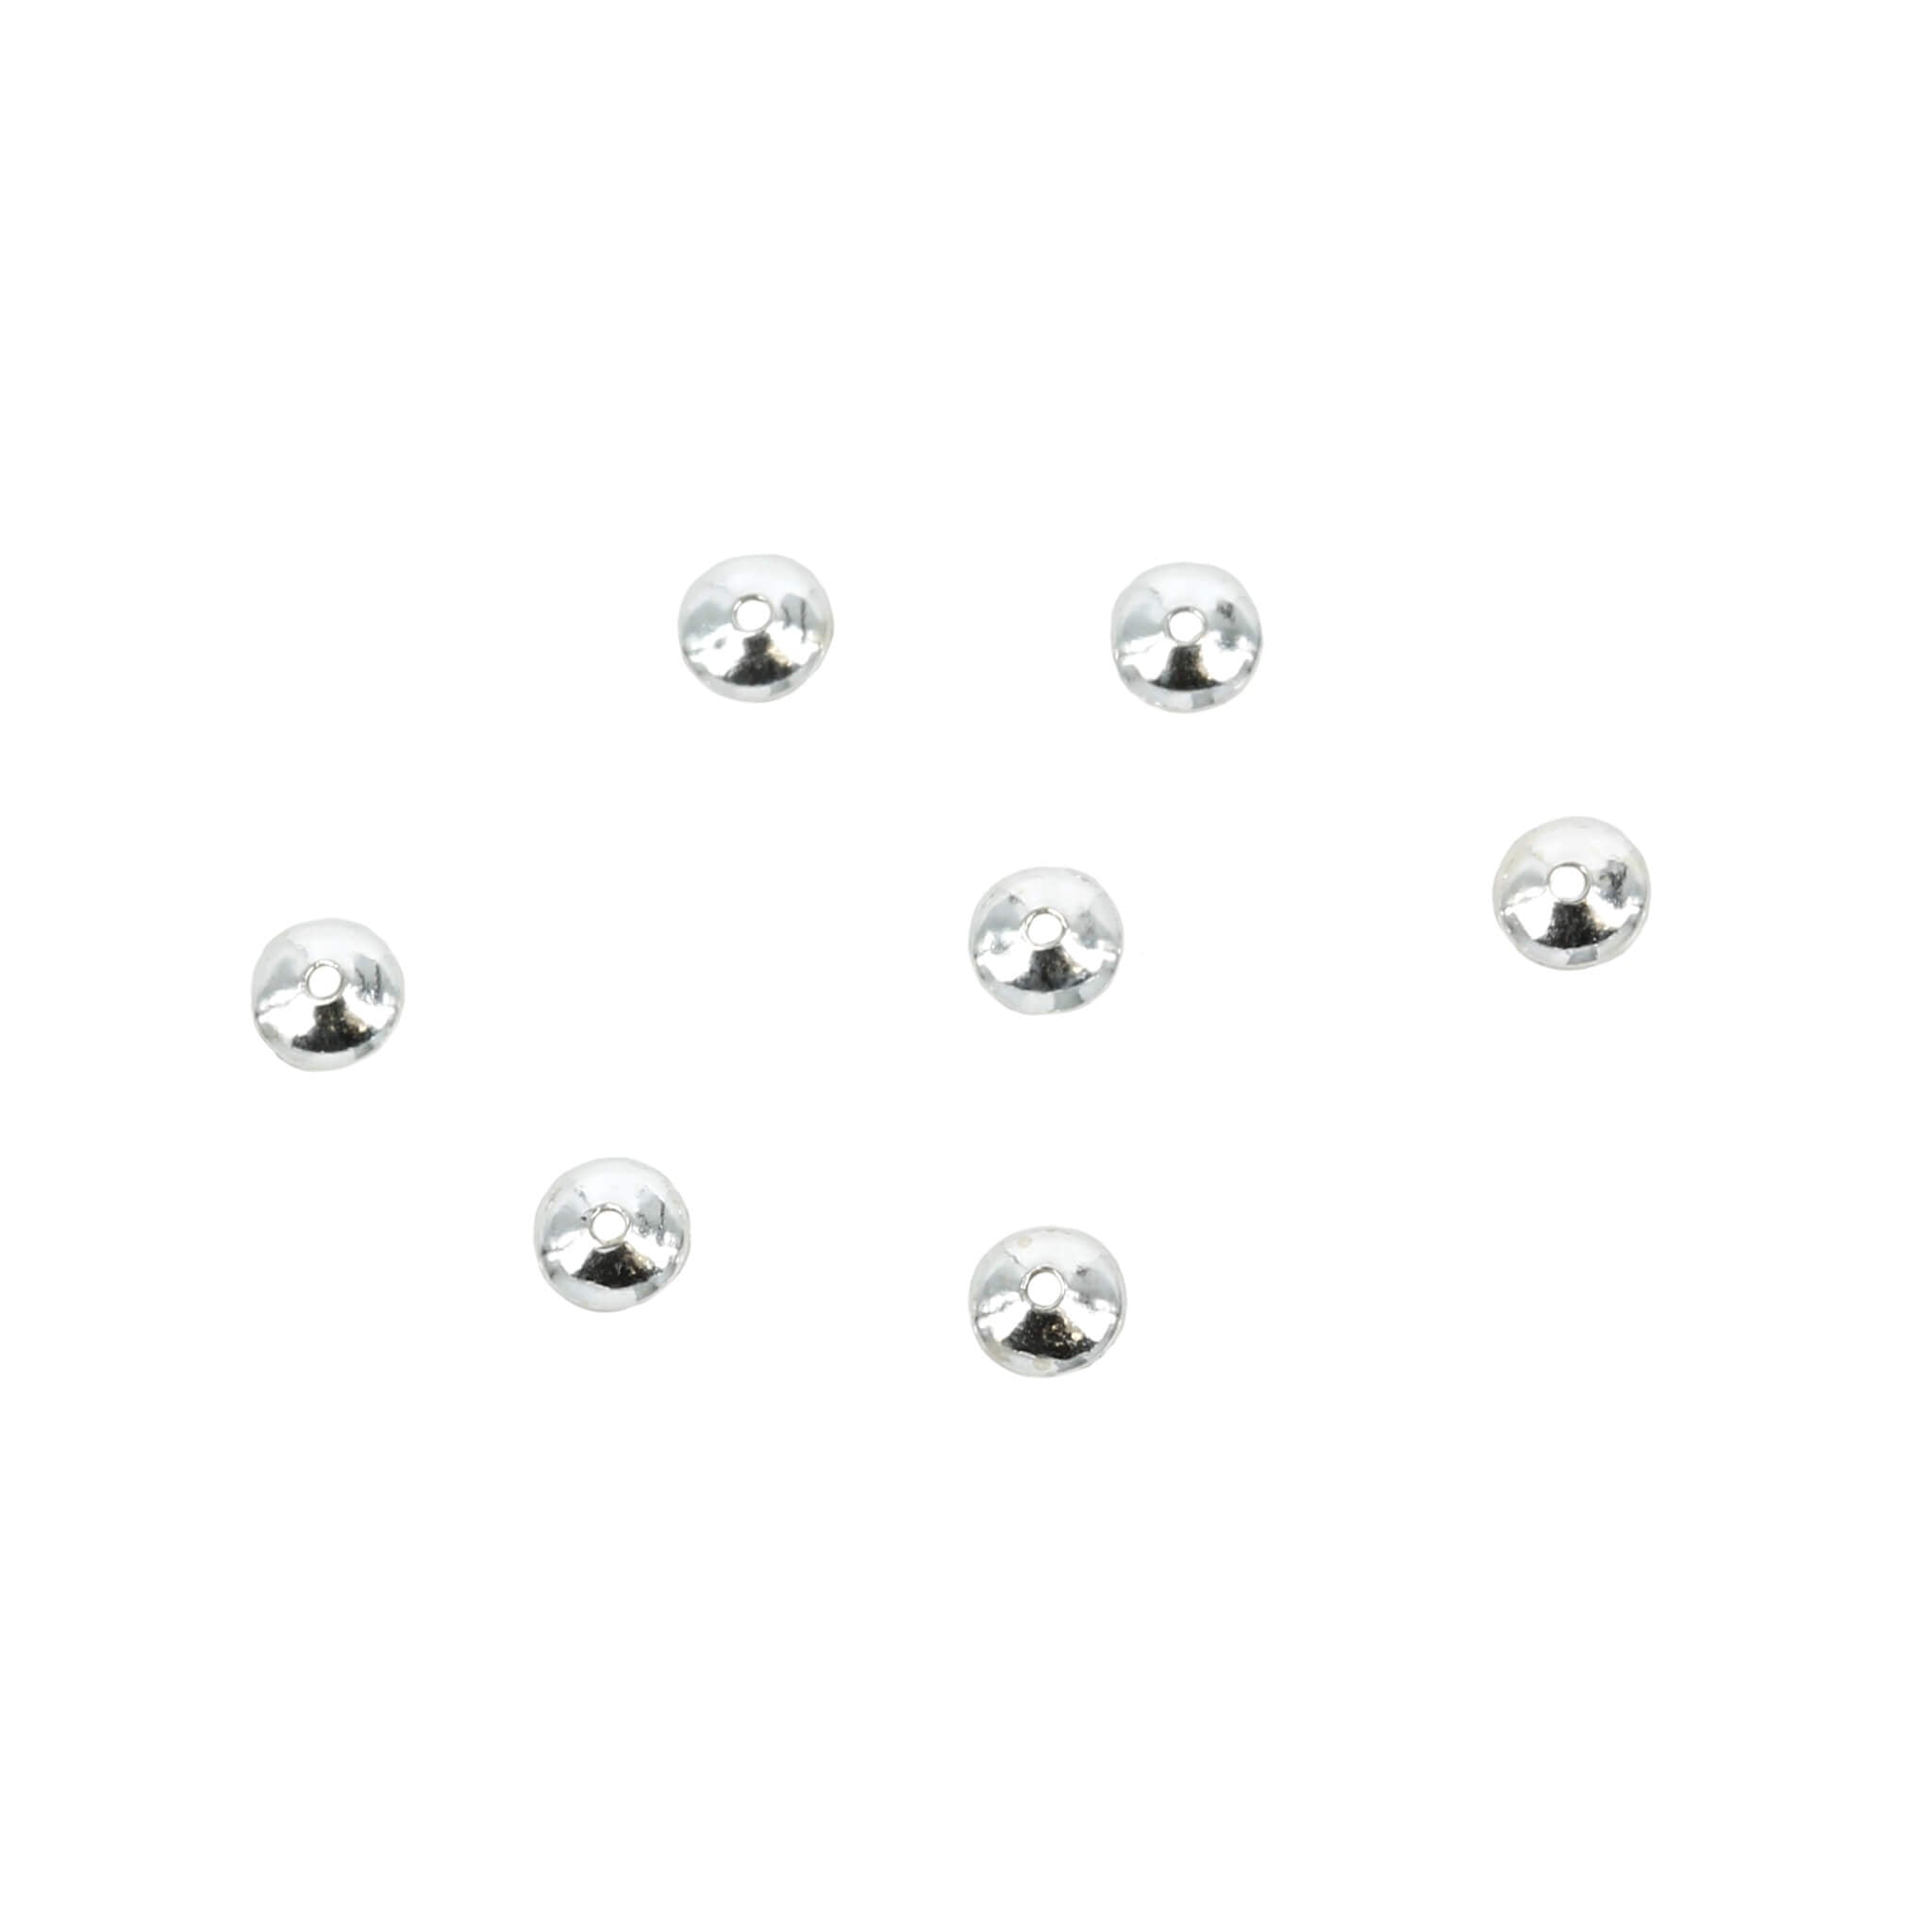 Round Bead Cap in Sterling Silver 3mm